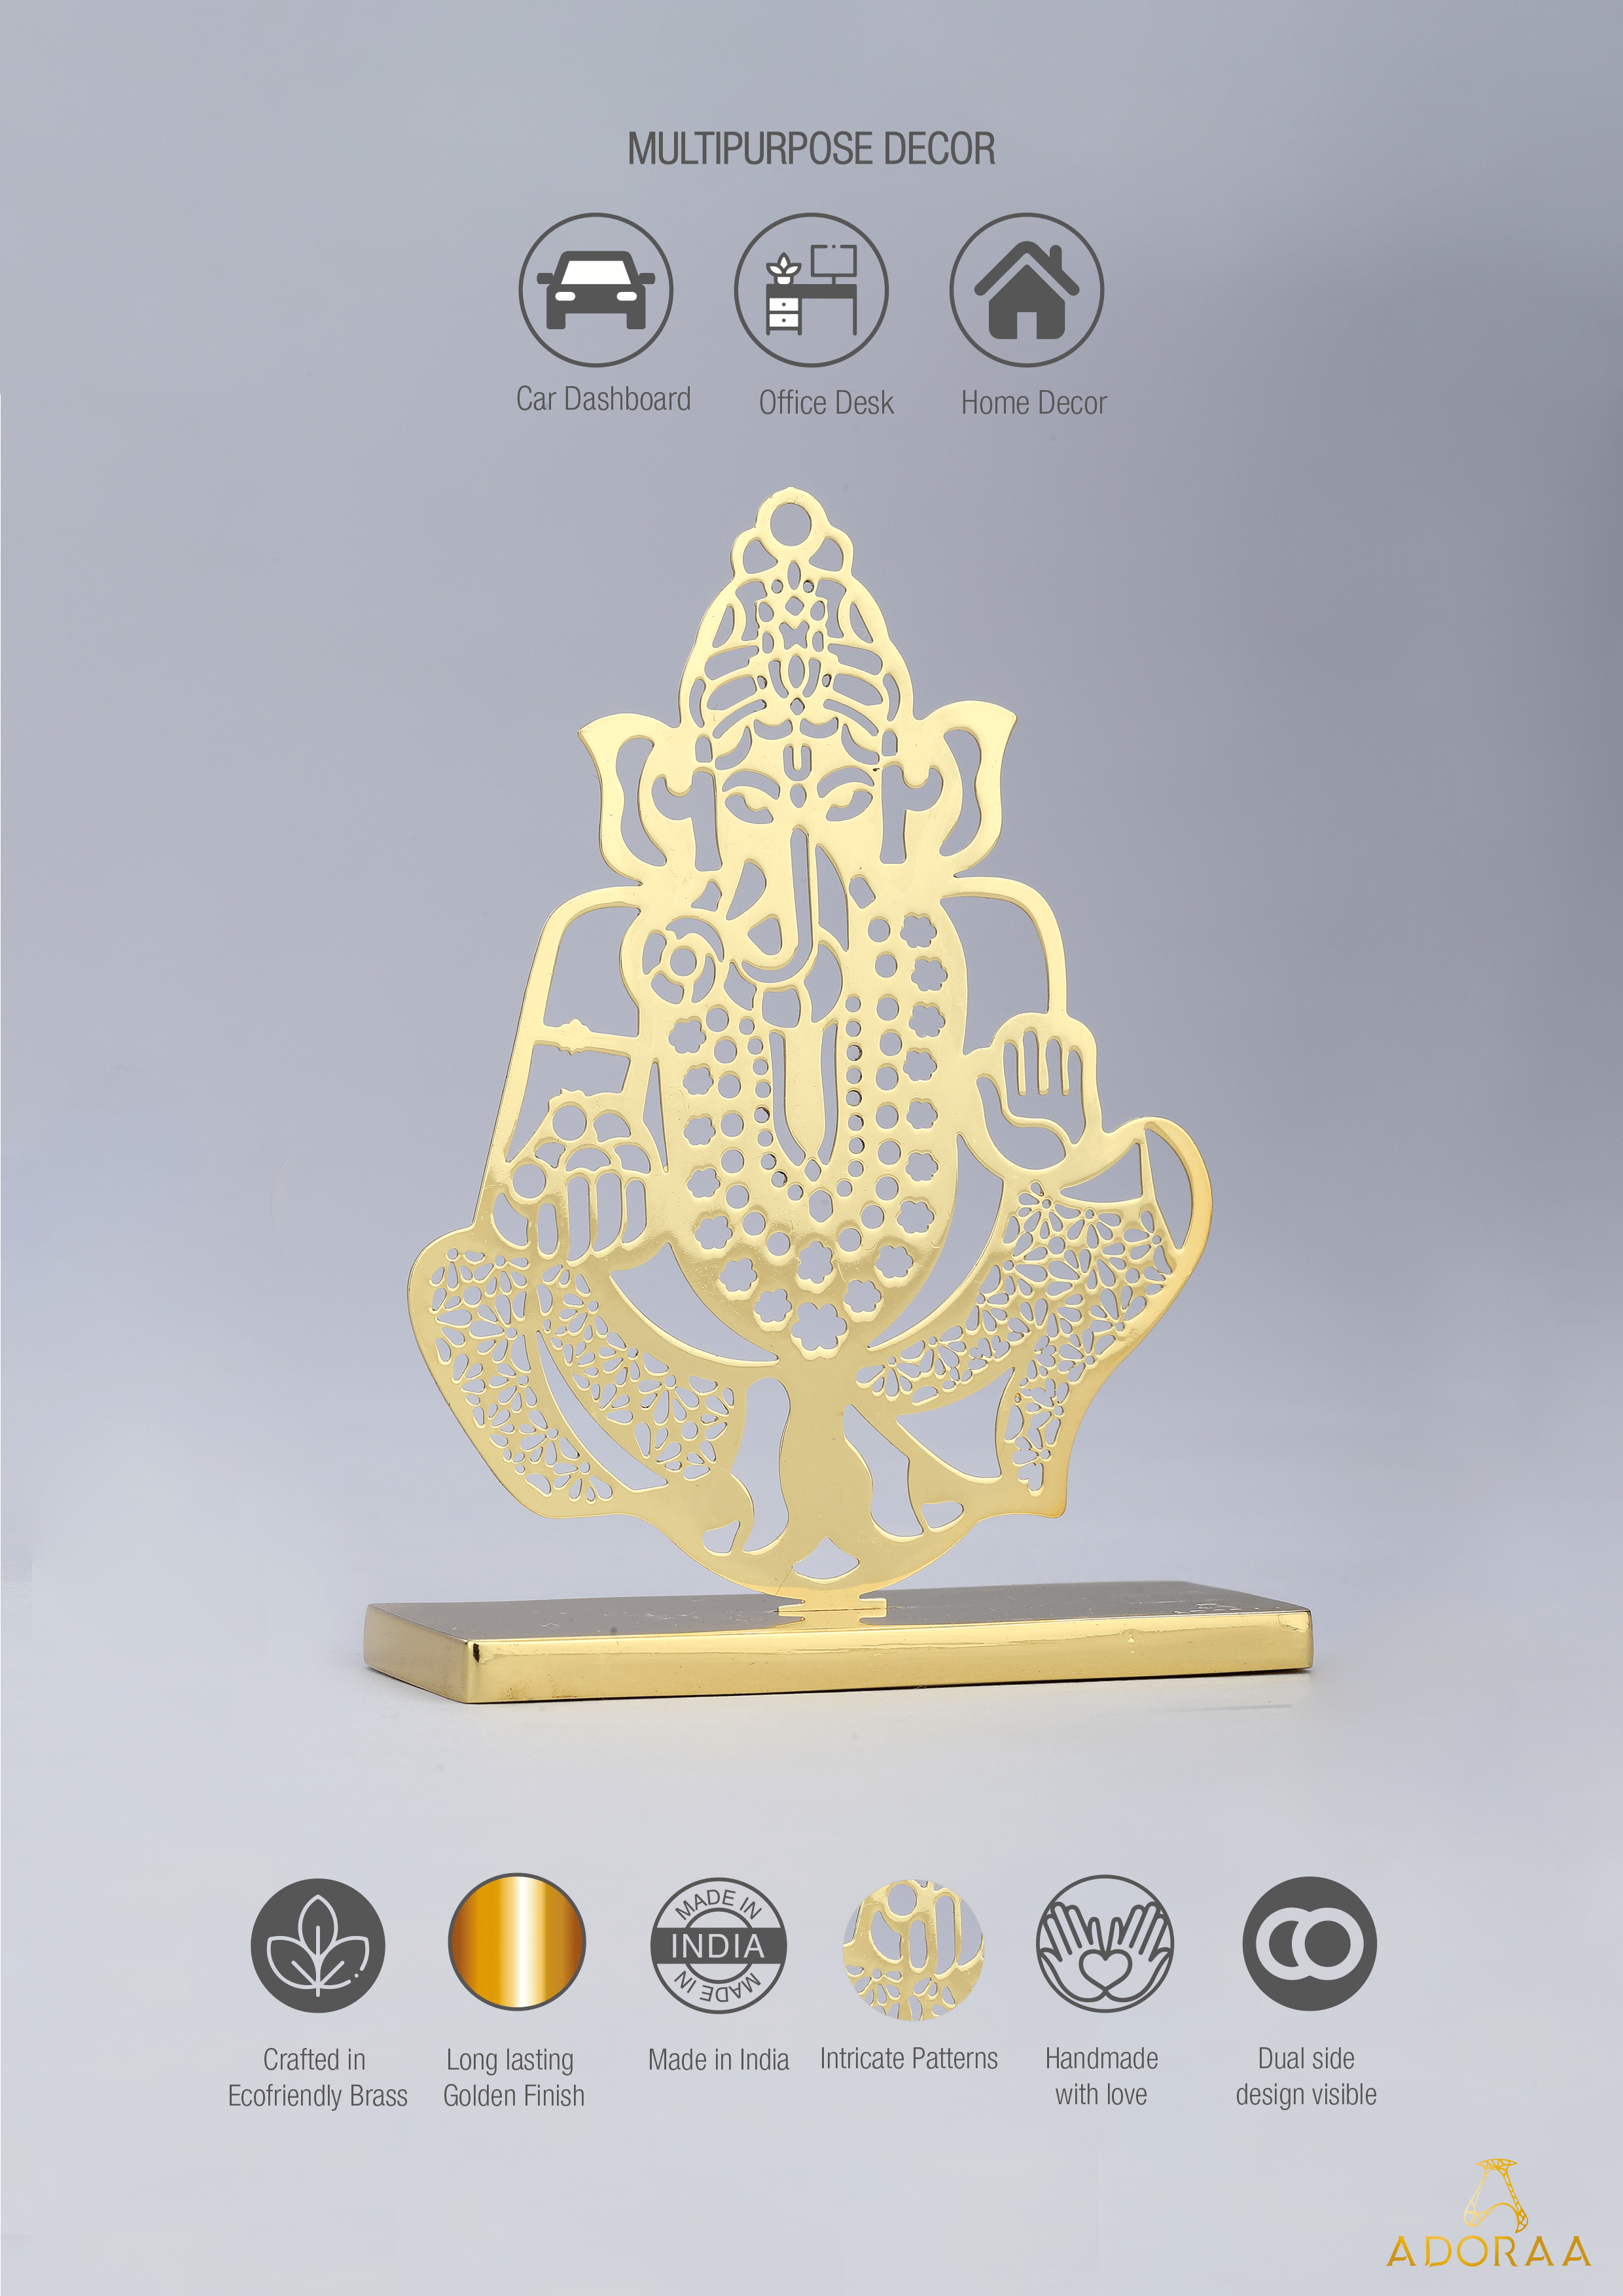 Ladoo Ganesha Desk/Car Dashboard Décor crafted in brass with golden finish